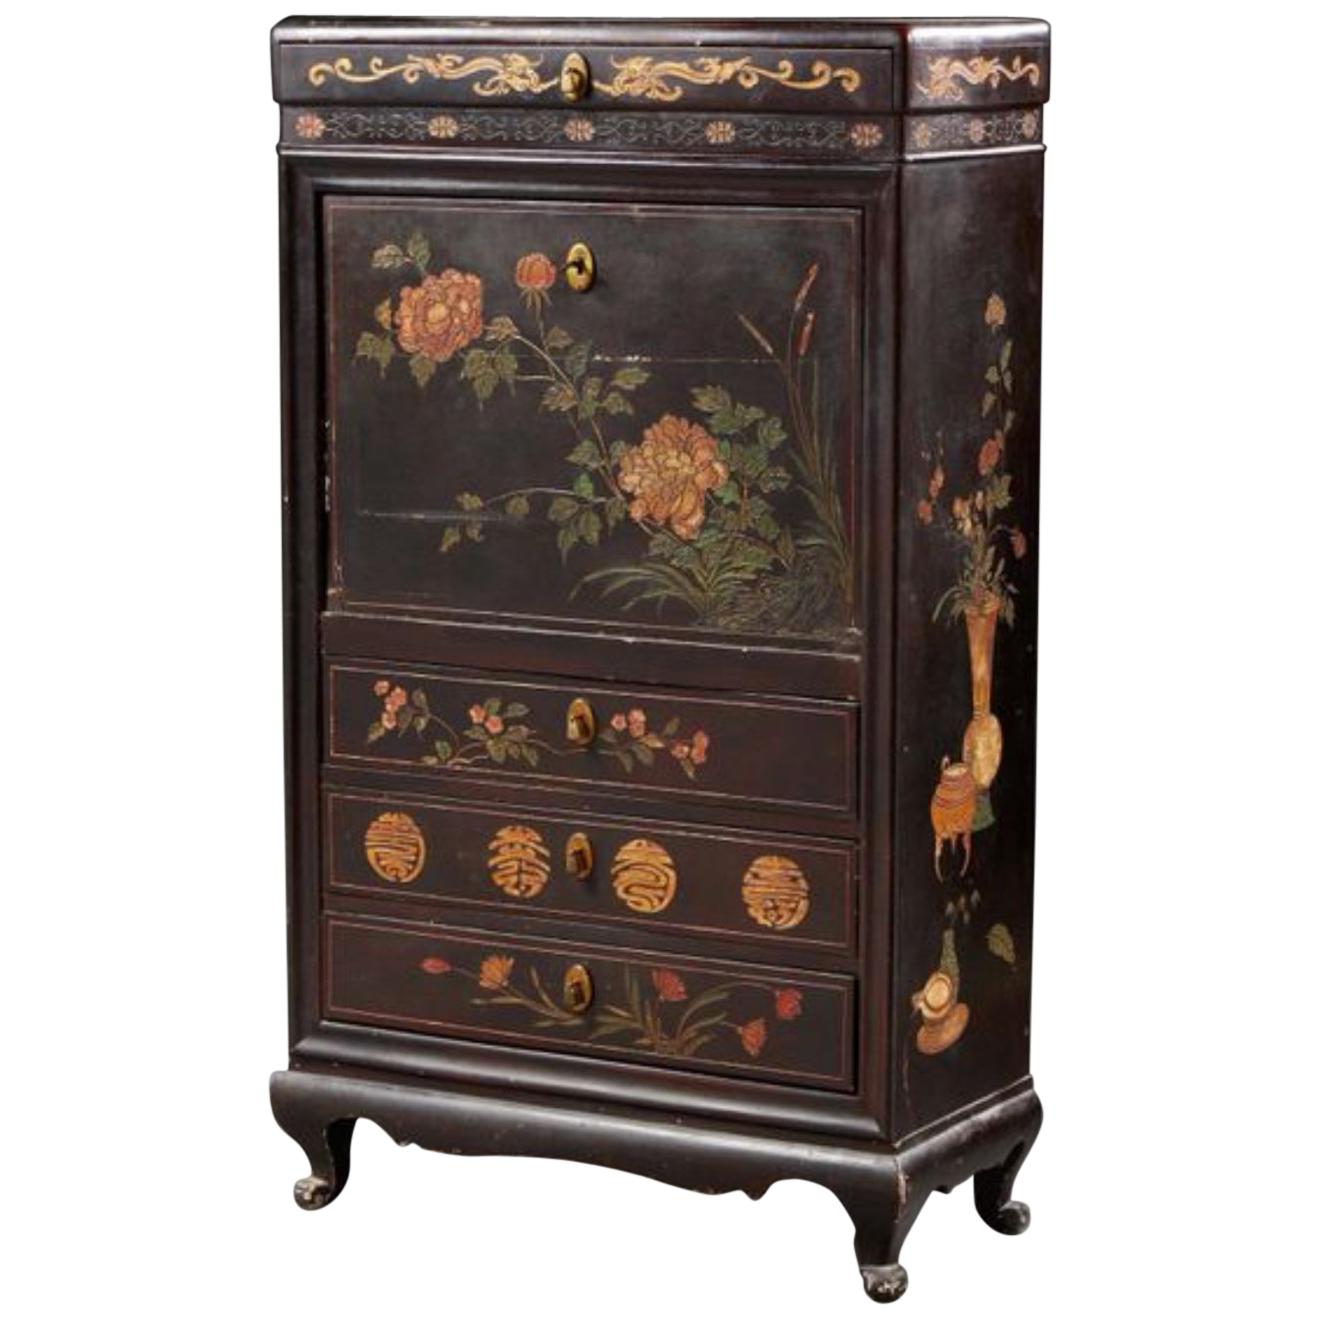 19th Century Hand Painted Secretary with Hidden Drawers and Floral Decorations